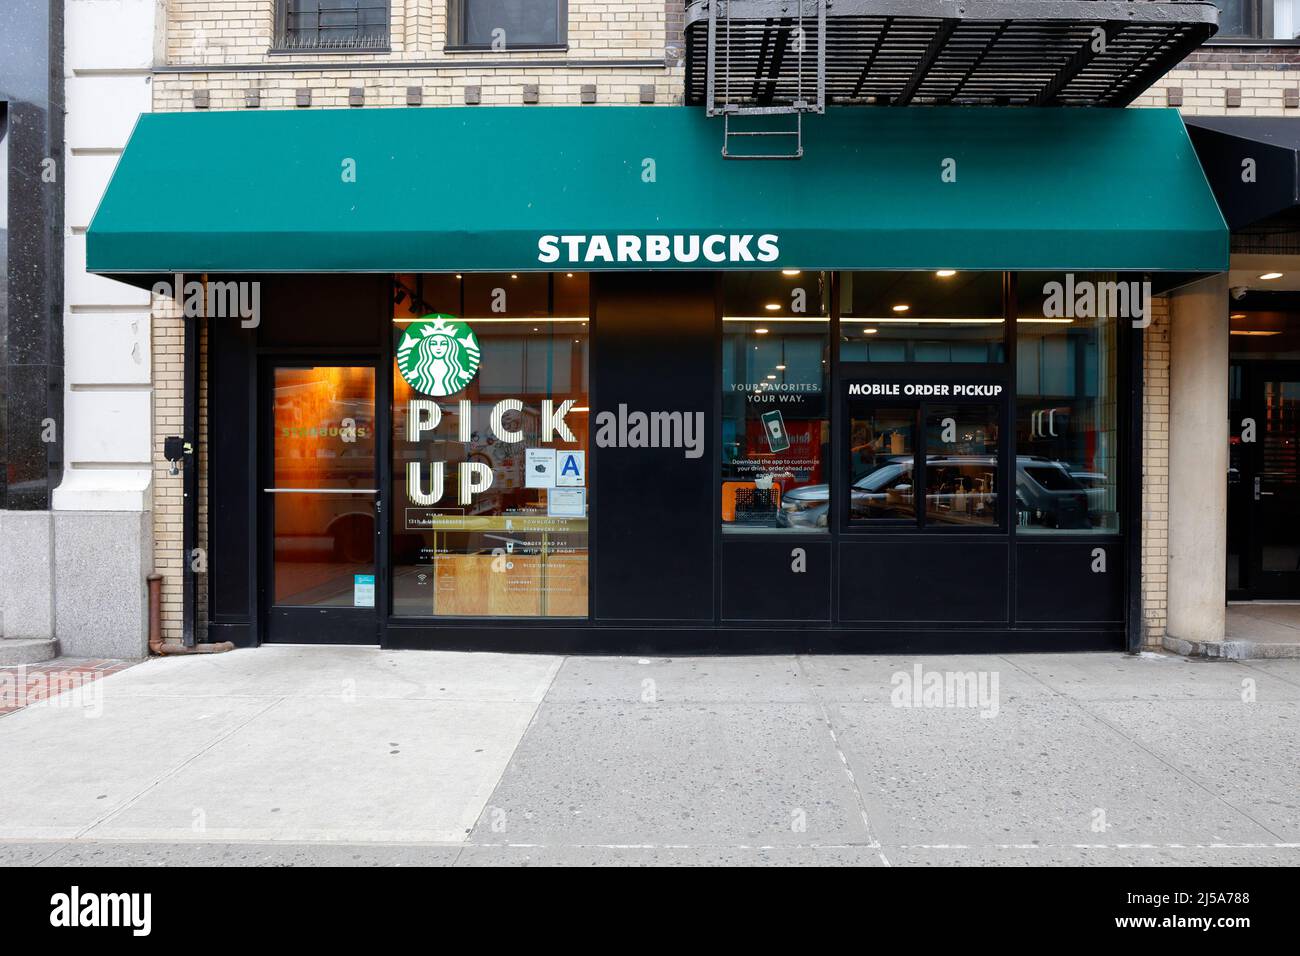 Starbucks Pickup, 111 University Pl, New York, NY. exterior storefront of coffee shop location in Union Square optimized for mobile orders on the go. Stock Photo